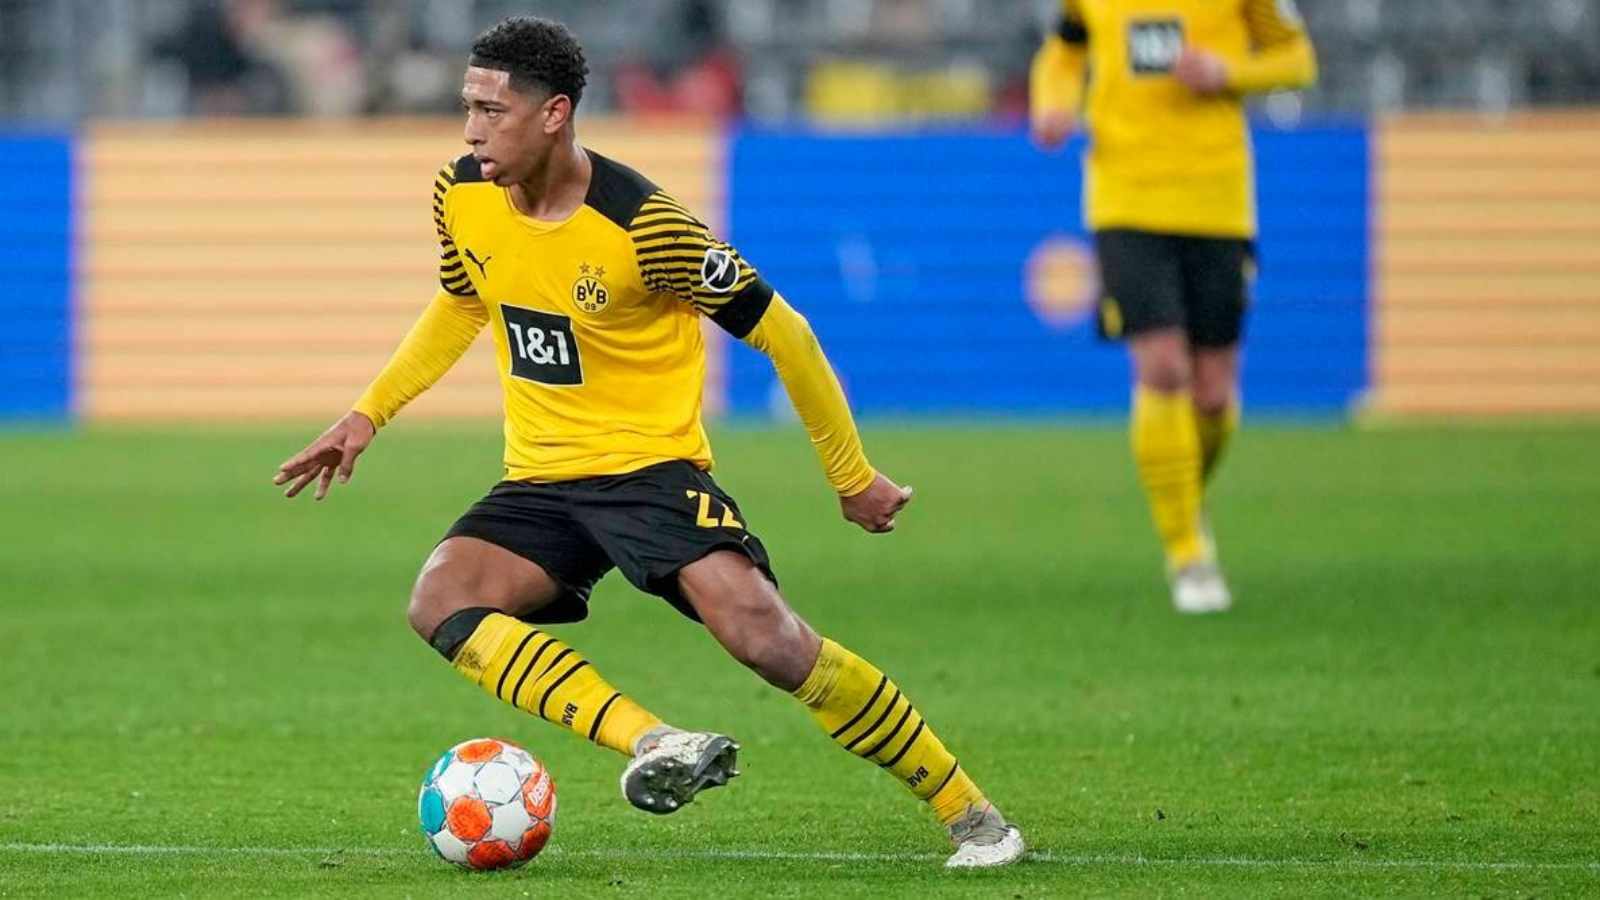 BVB's Jude Bellingham remains a top priority for Manchester United in the transfer window FirstSportz